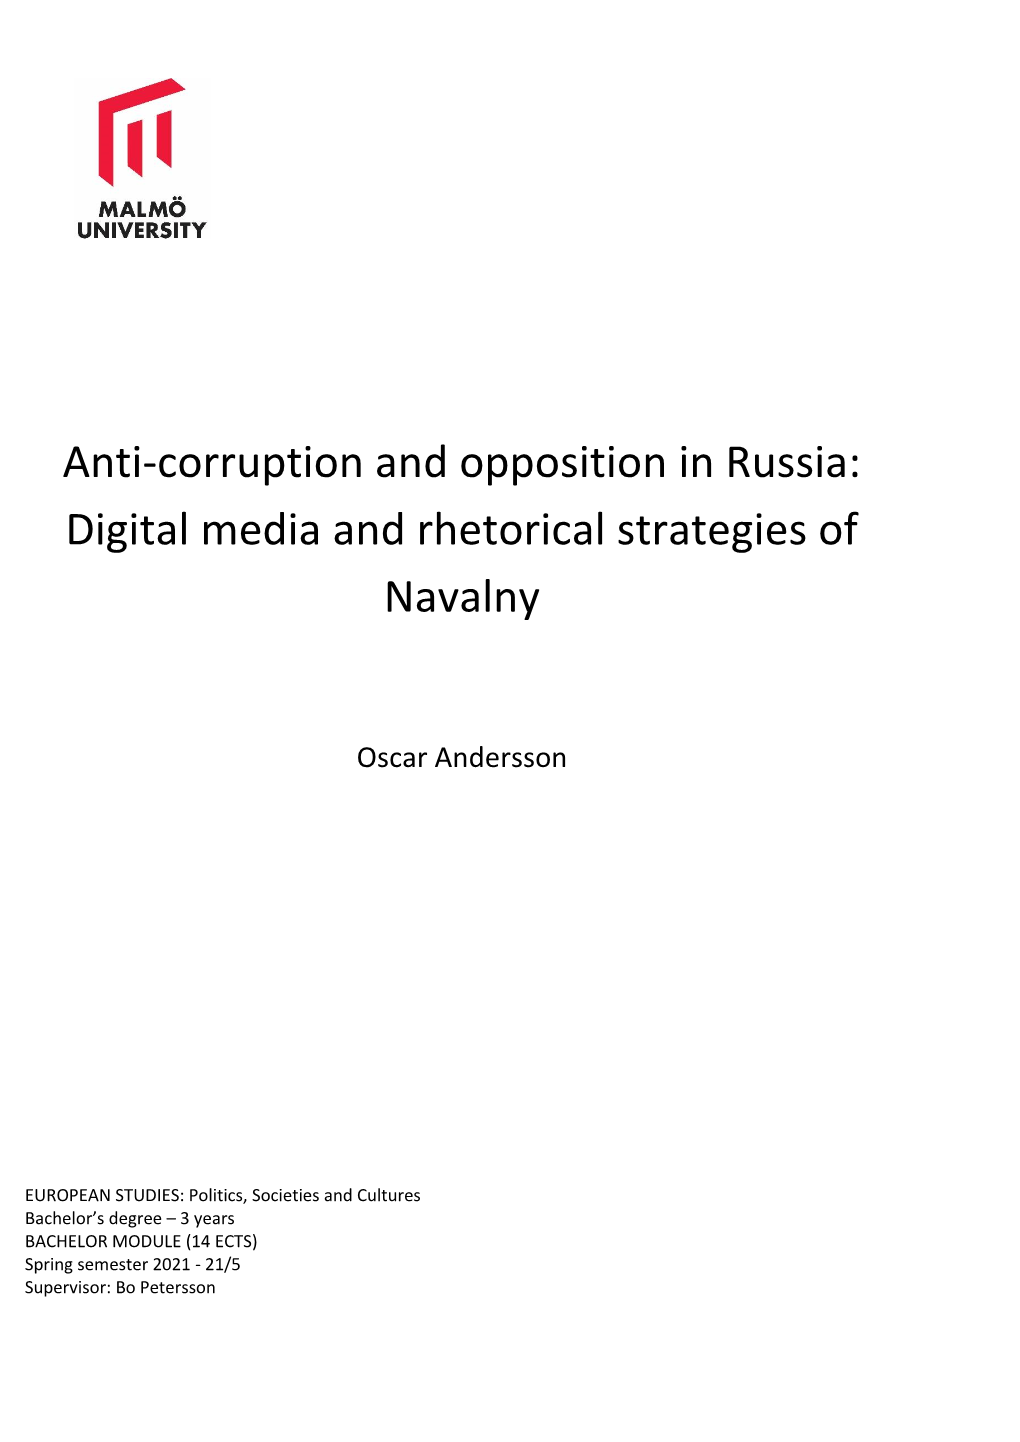 Anti-Corruption and Opposition in Russia: Digital Media and Rhetorical Strategies of Navalny